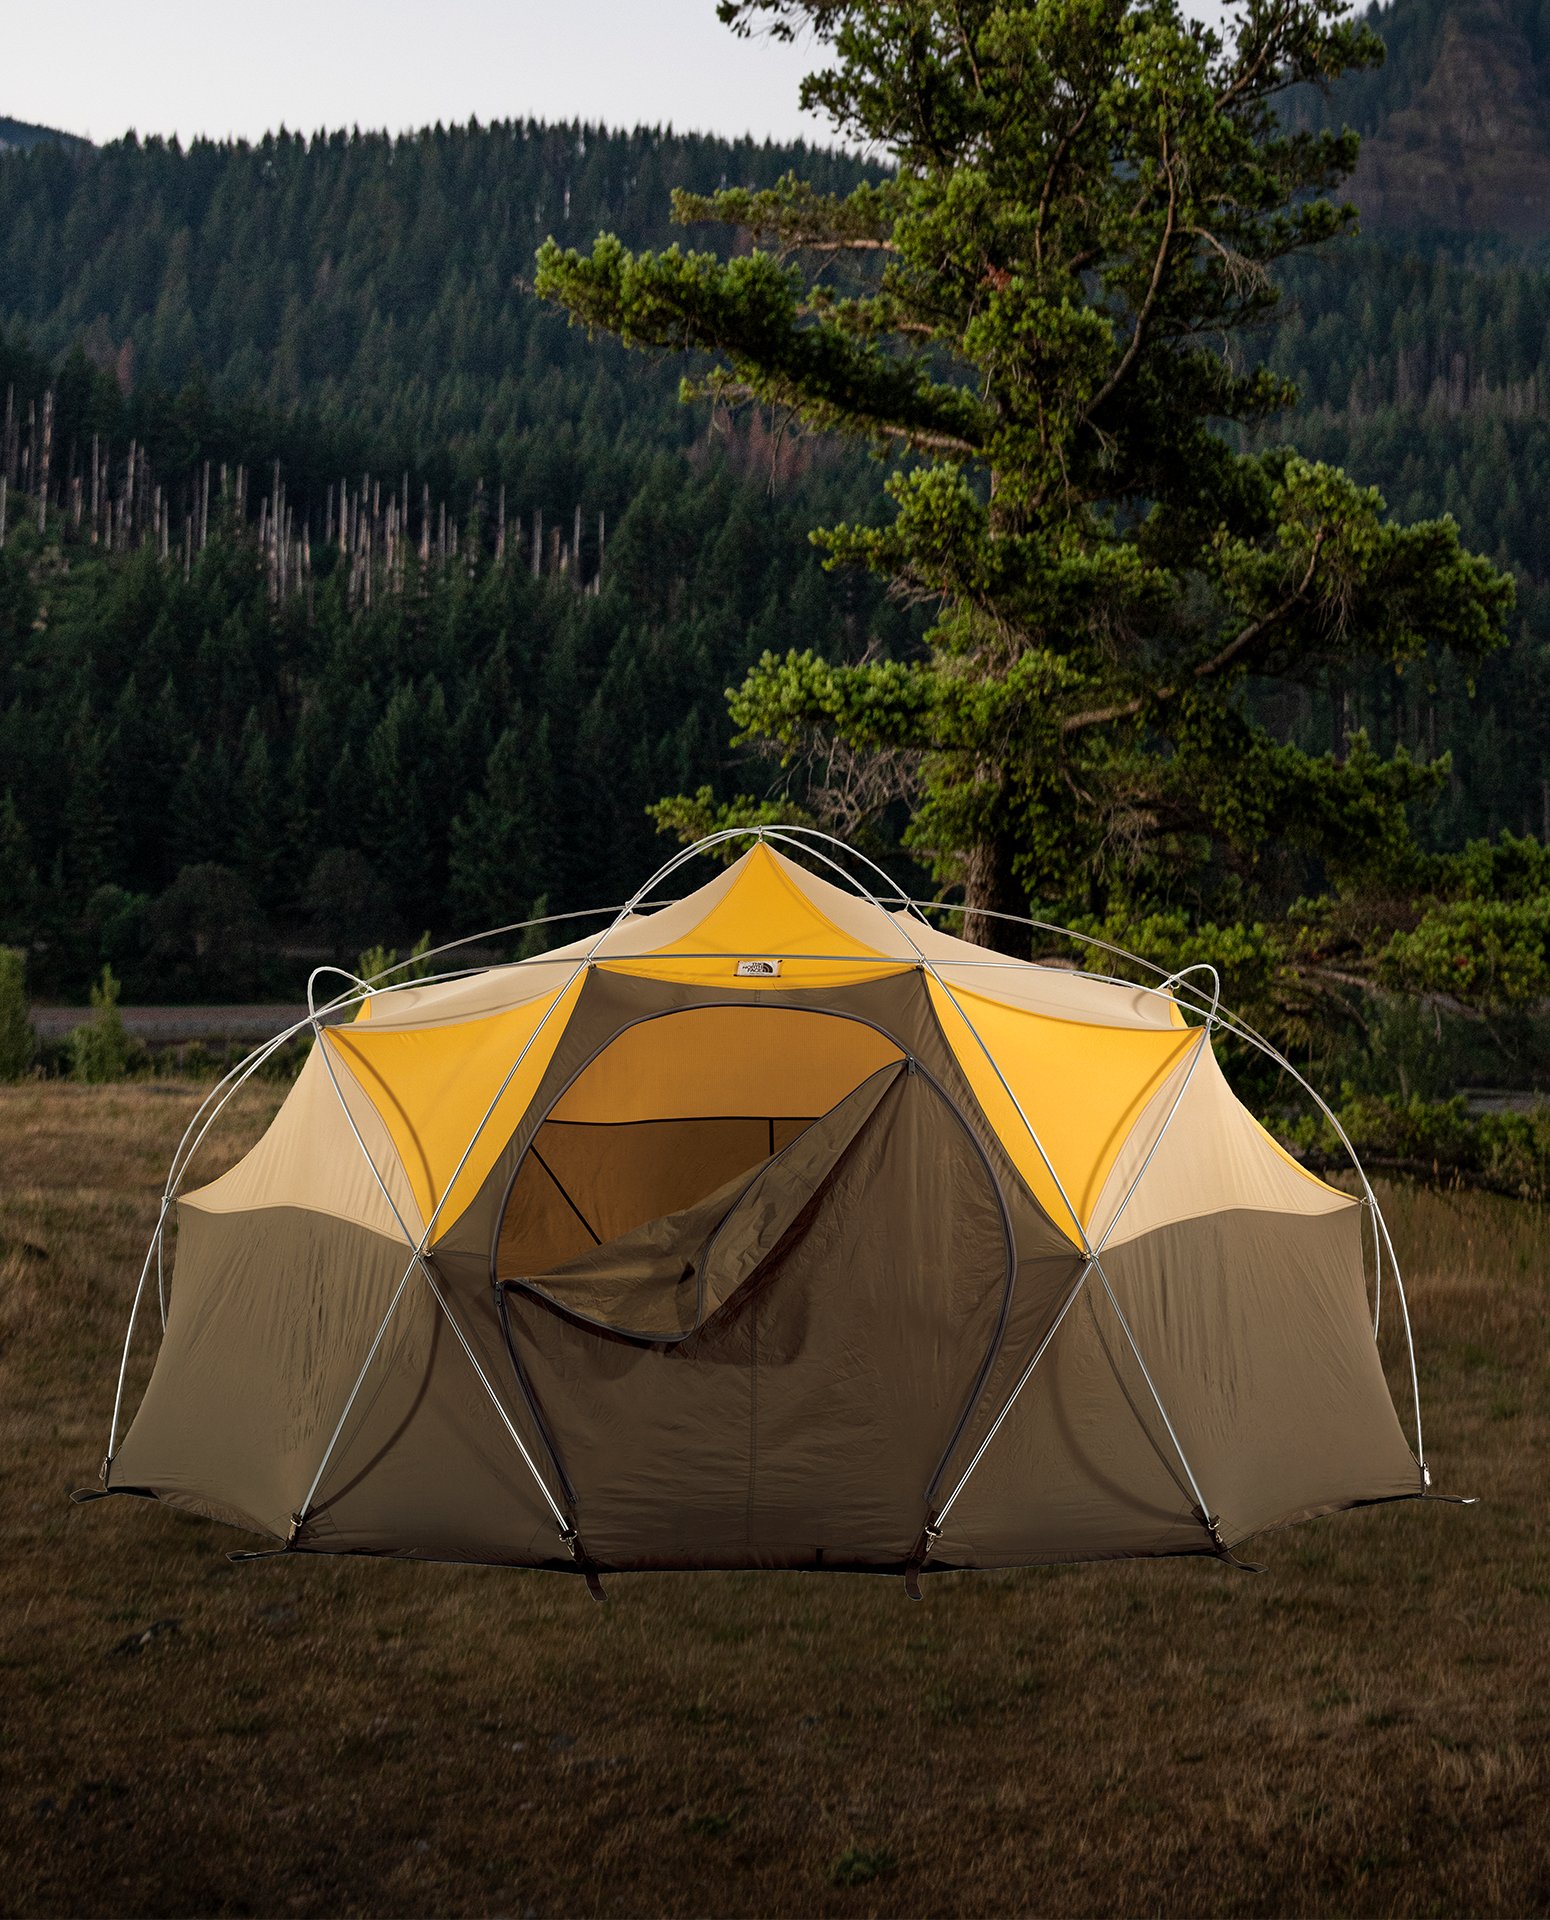 The efficient construction and unique design of the first oval-shaped tent is demonstrated.